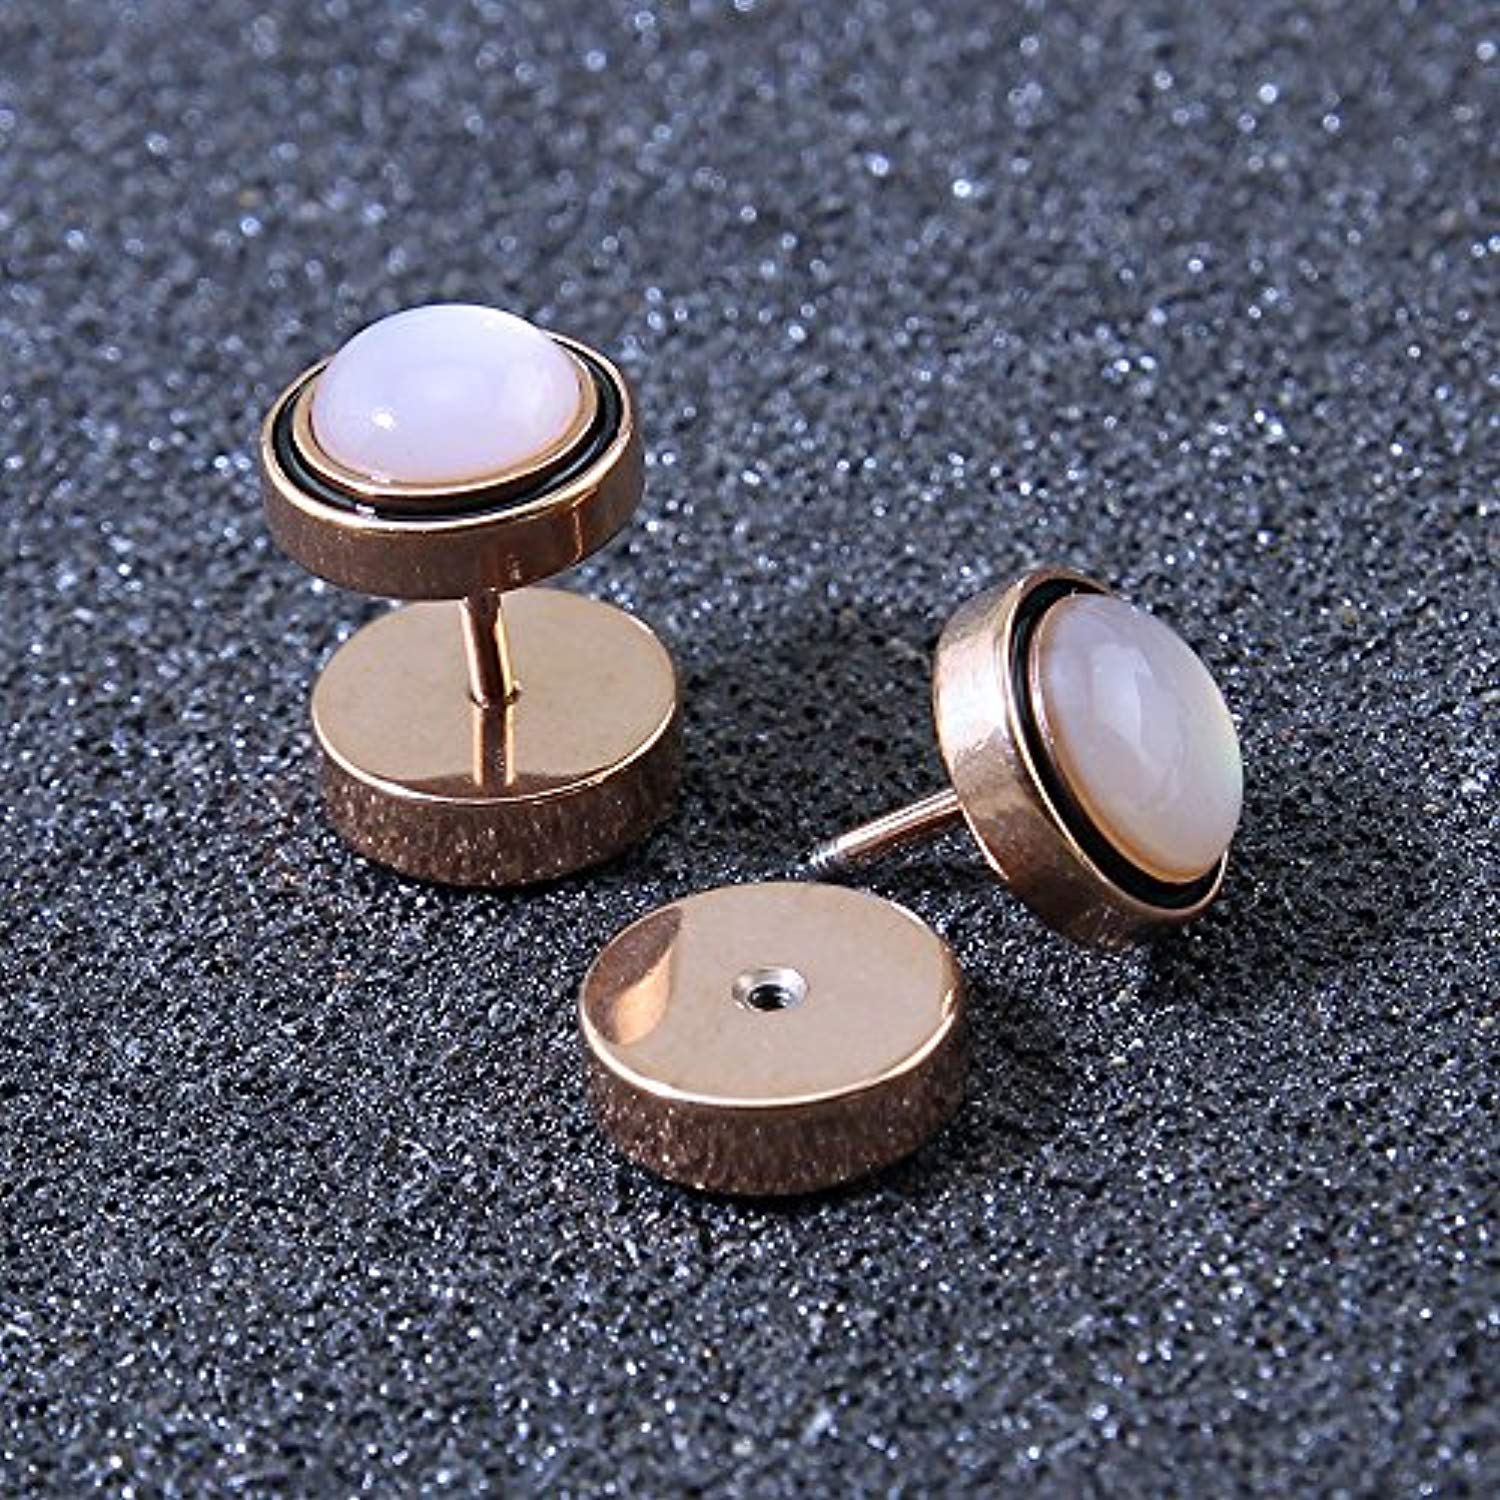 Rose Gold Men Women Stainless Steel Cheater Ear Plugs Gauges Illusion Tunnel Earring Studs